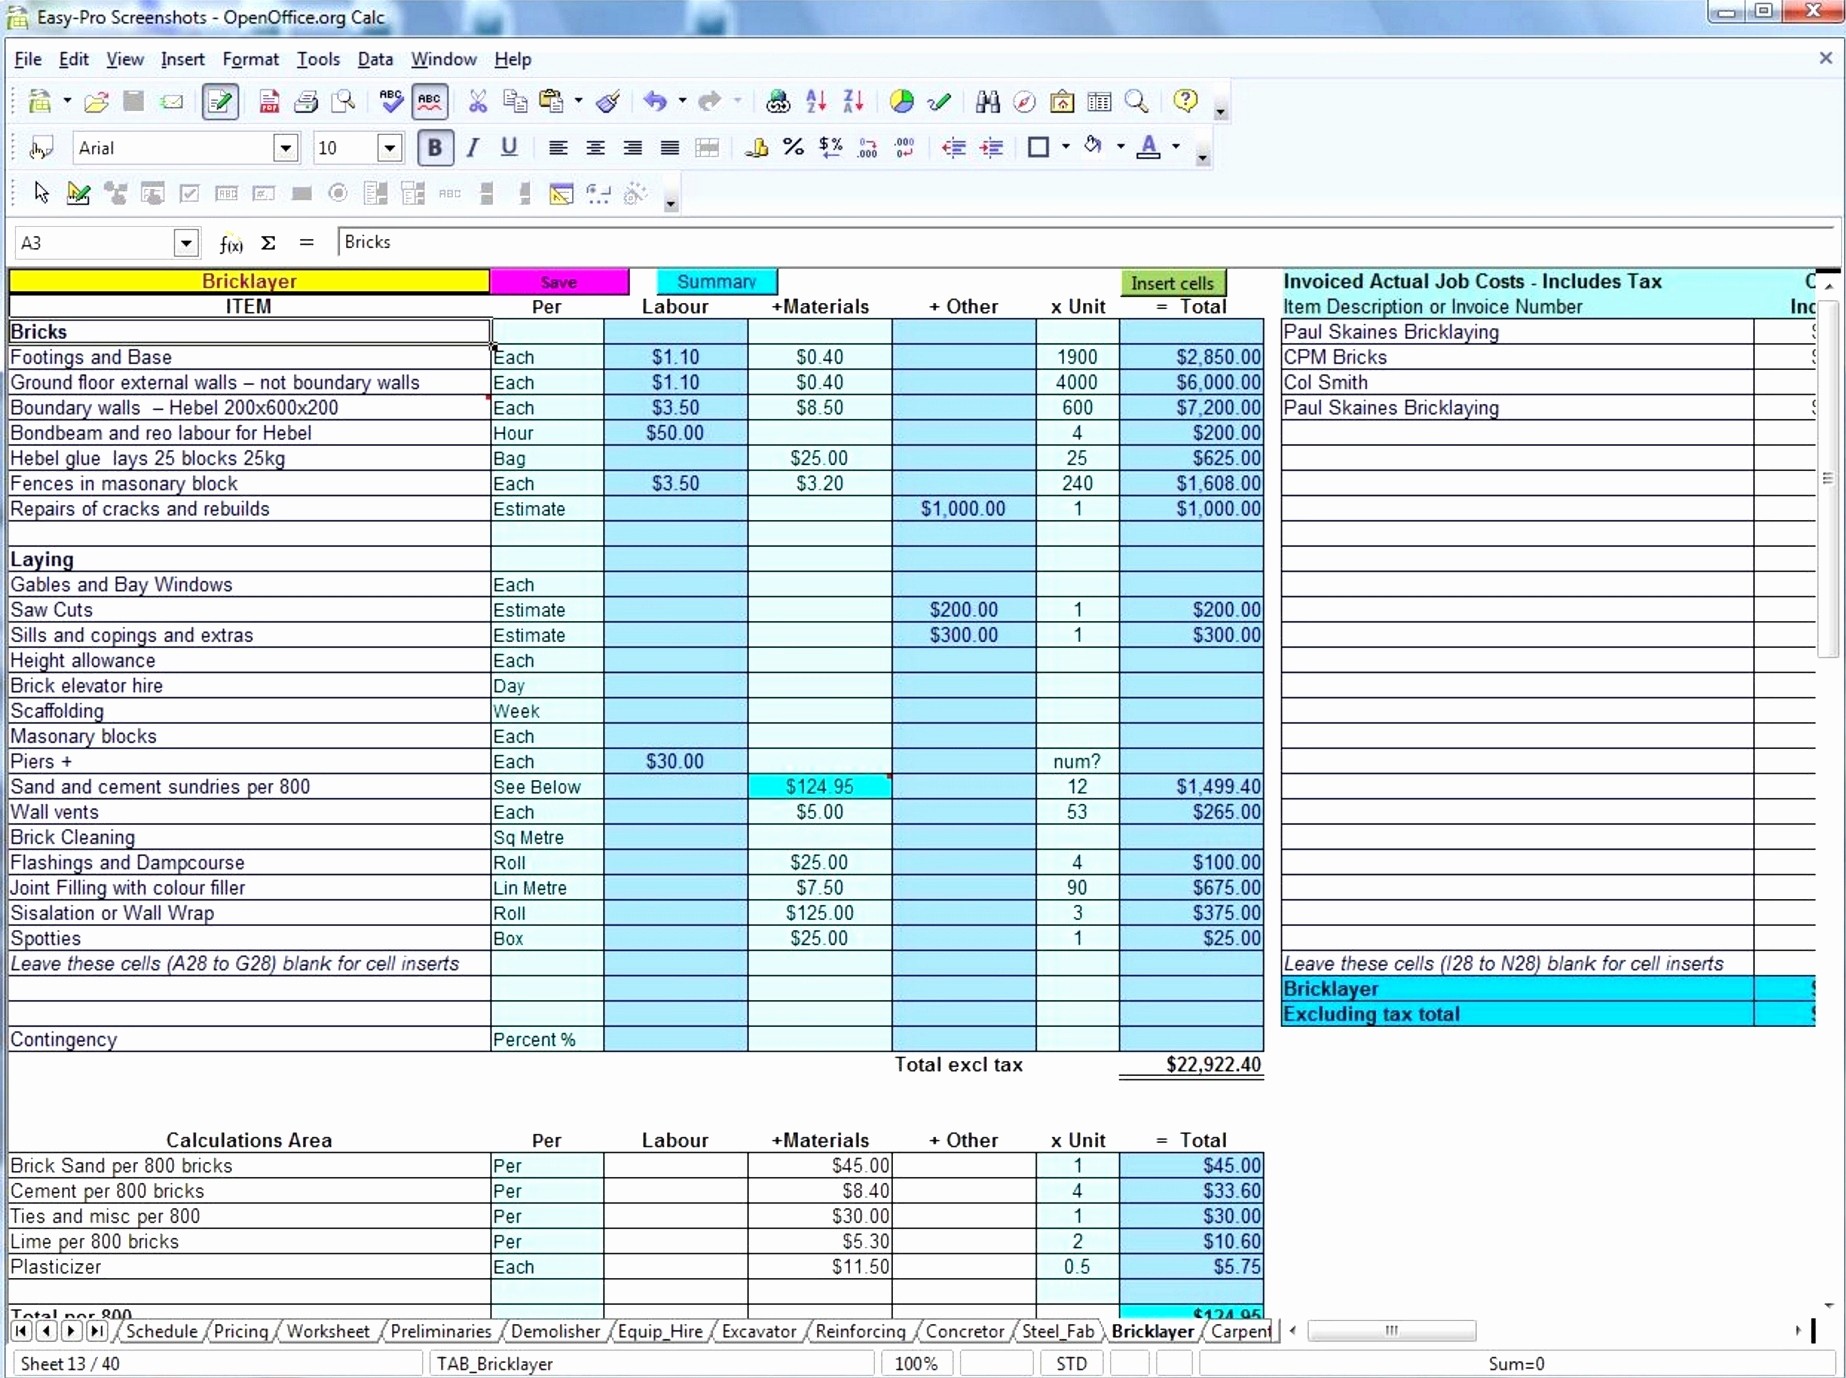 50 Best Of Cooling Load Calculation Software Excel DOCUMENTS IDEAS Document